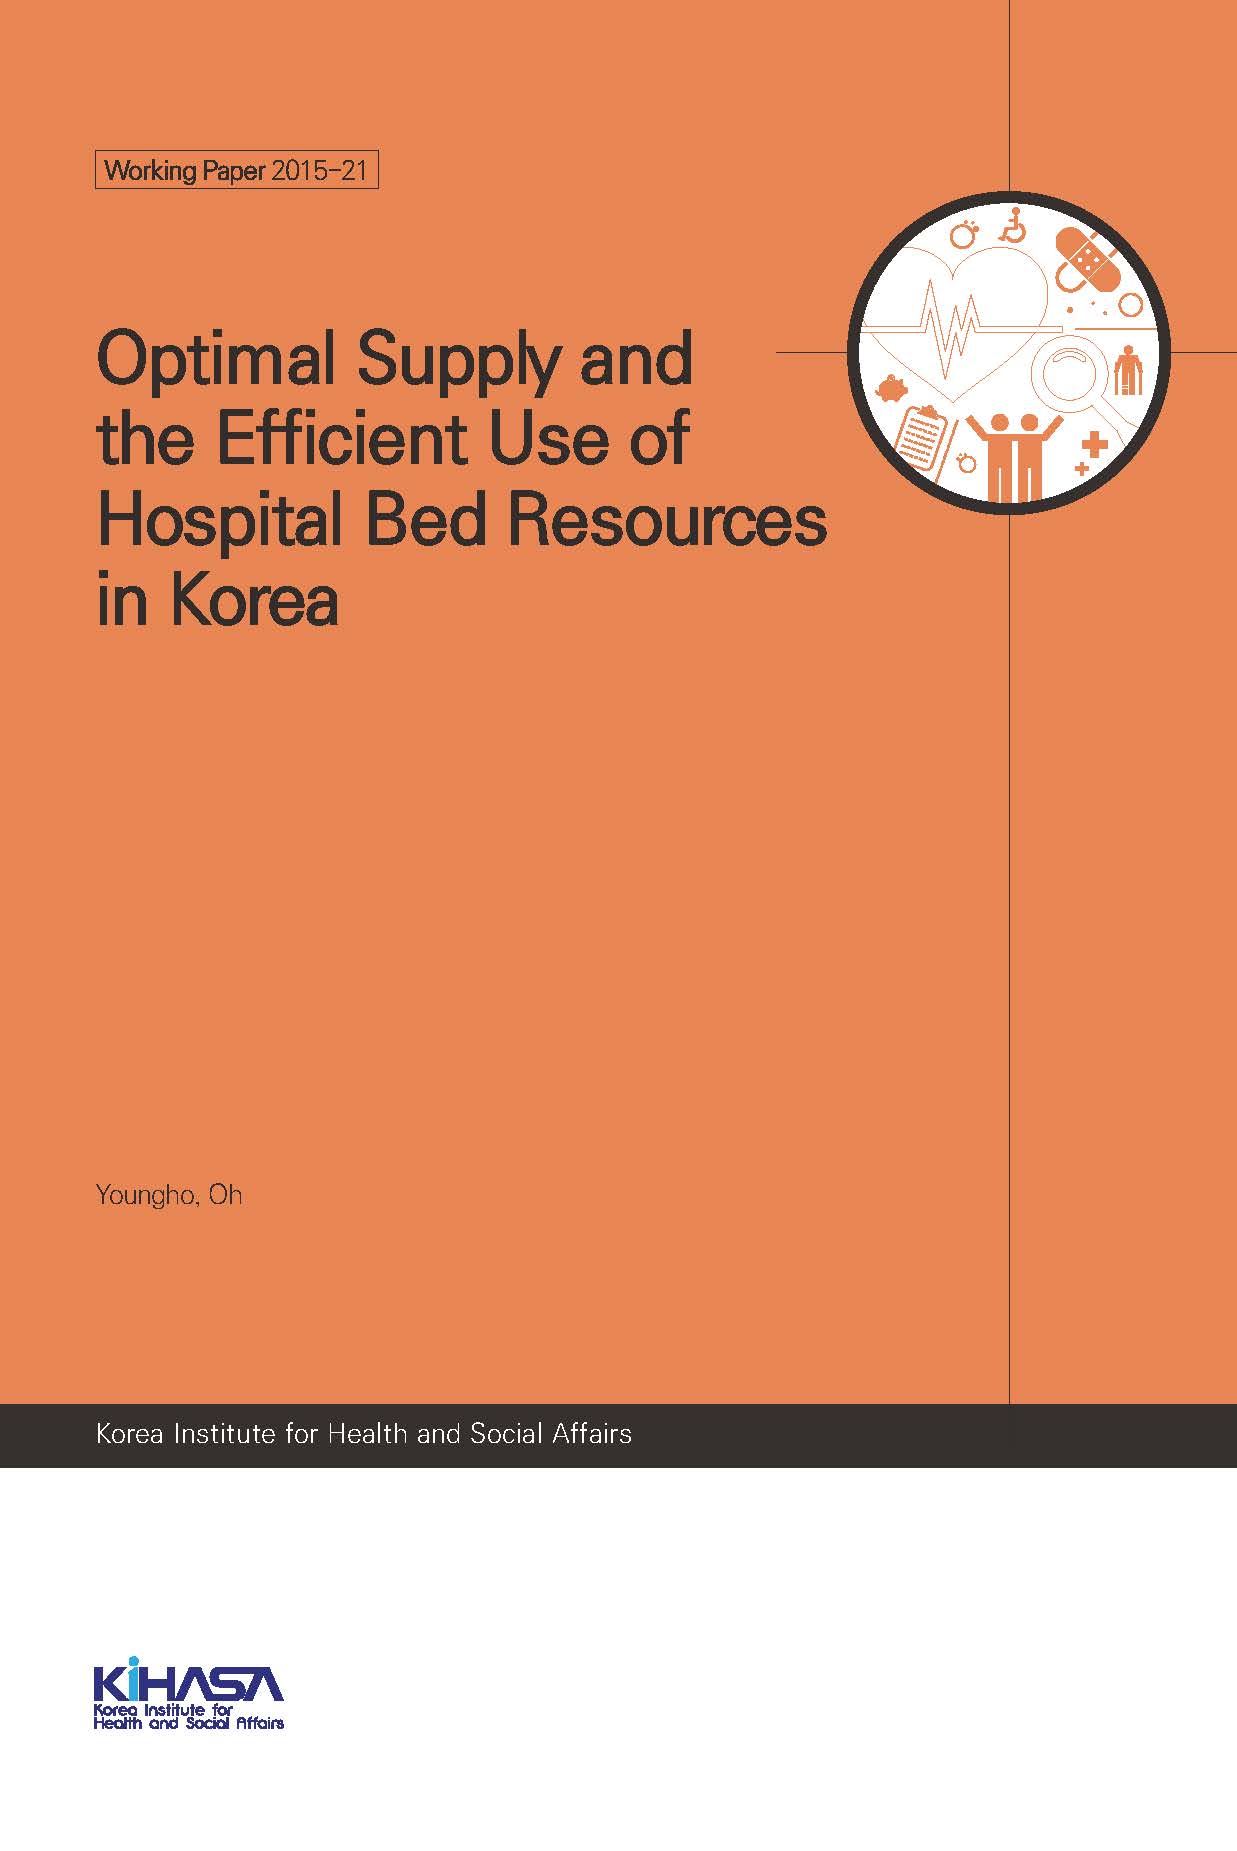 Optimal Supply and the Efficient Use of Hospital Bed Resources in Korea